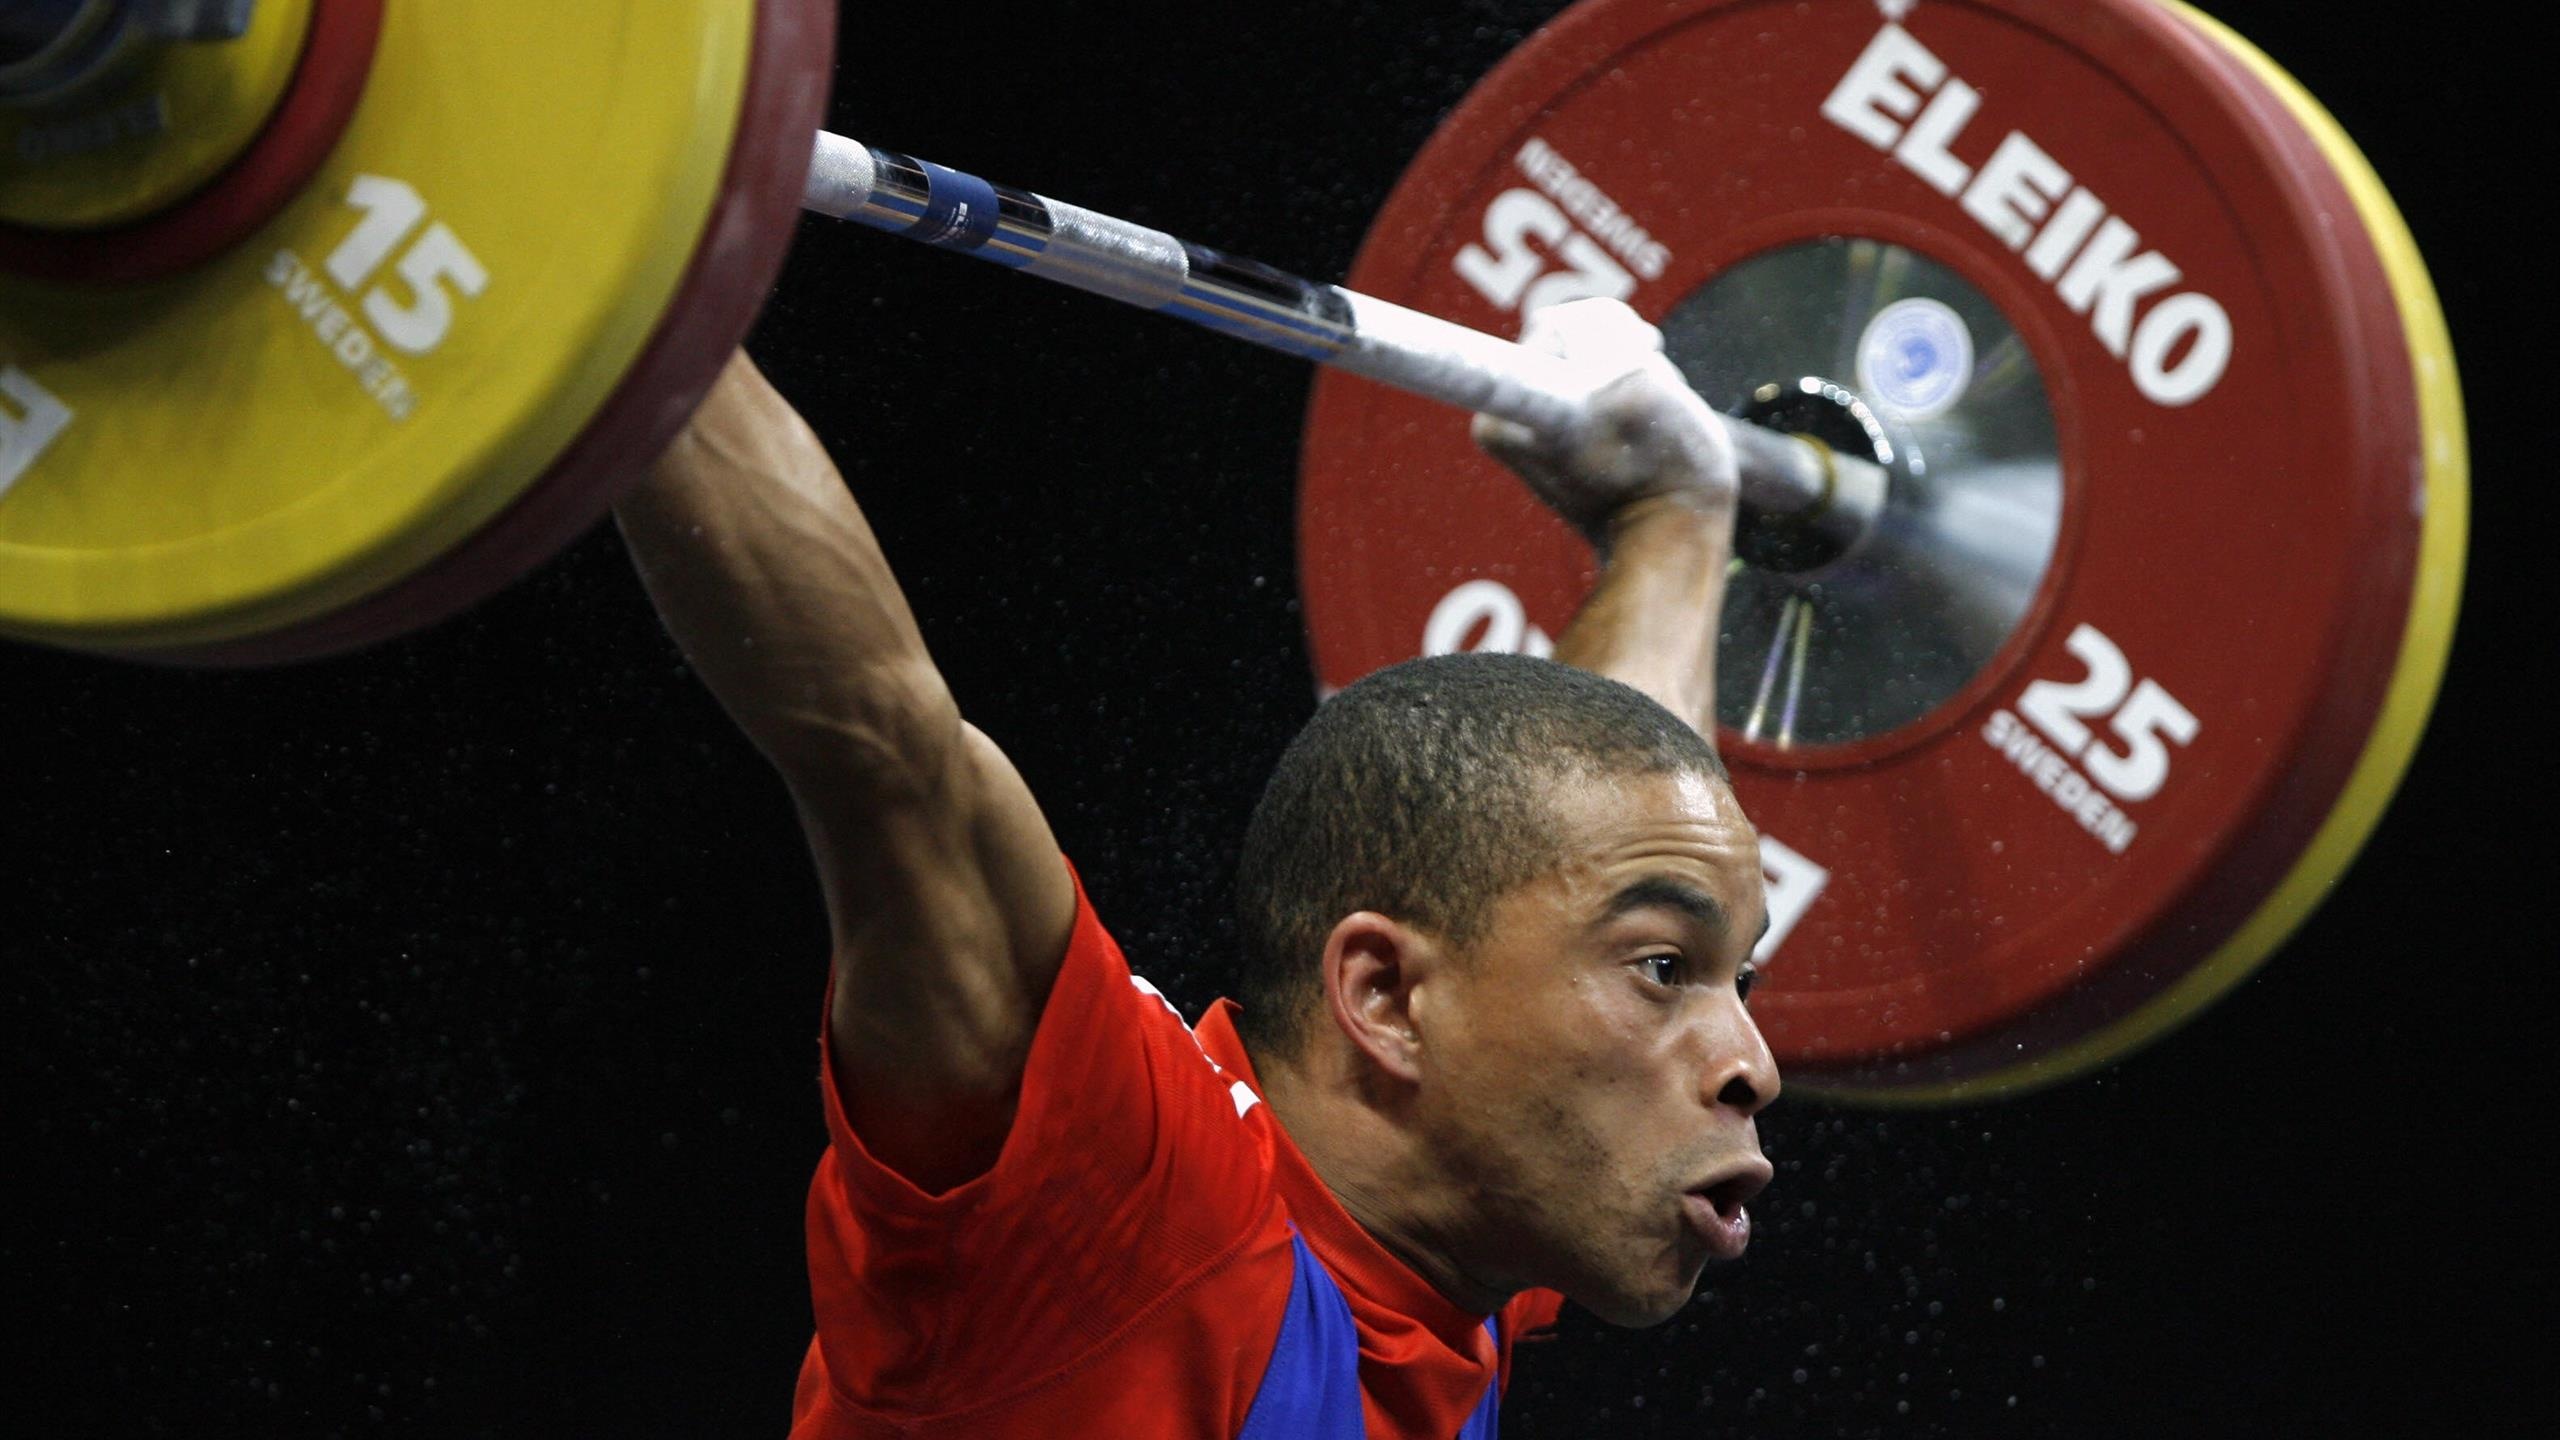 Weightlifting: The bar loaded with weights, Rio 2016 Olympic Games, Strength athletics. 2560x1440 HD Background.